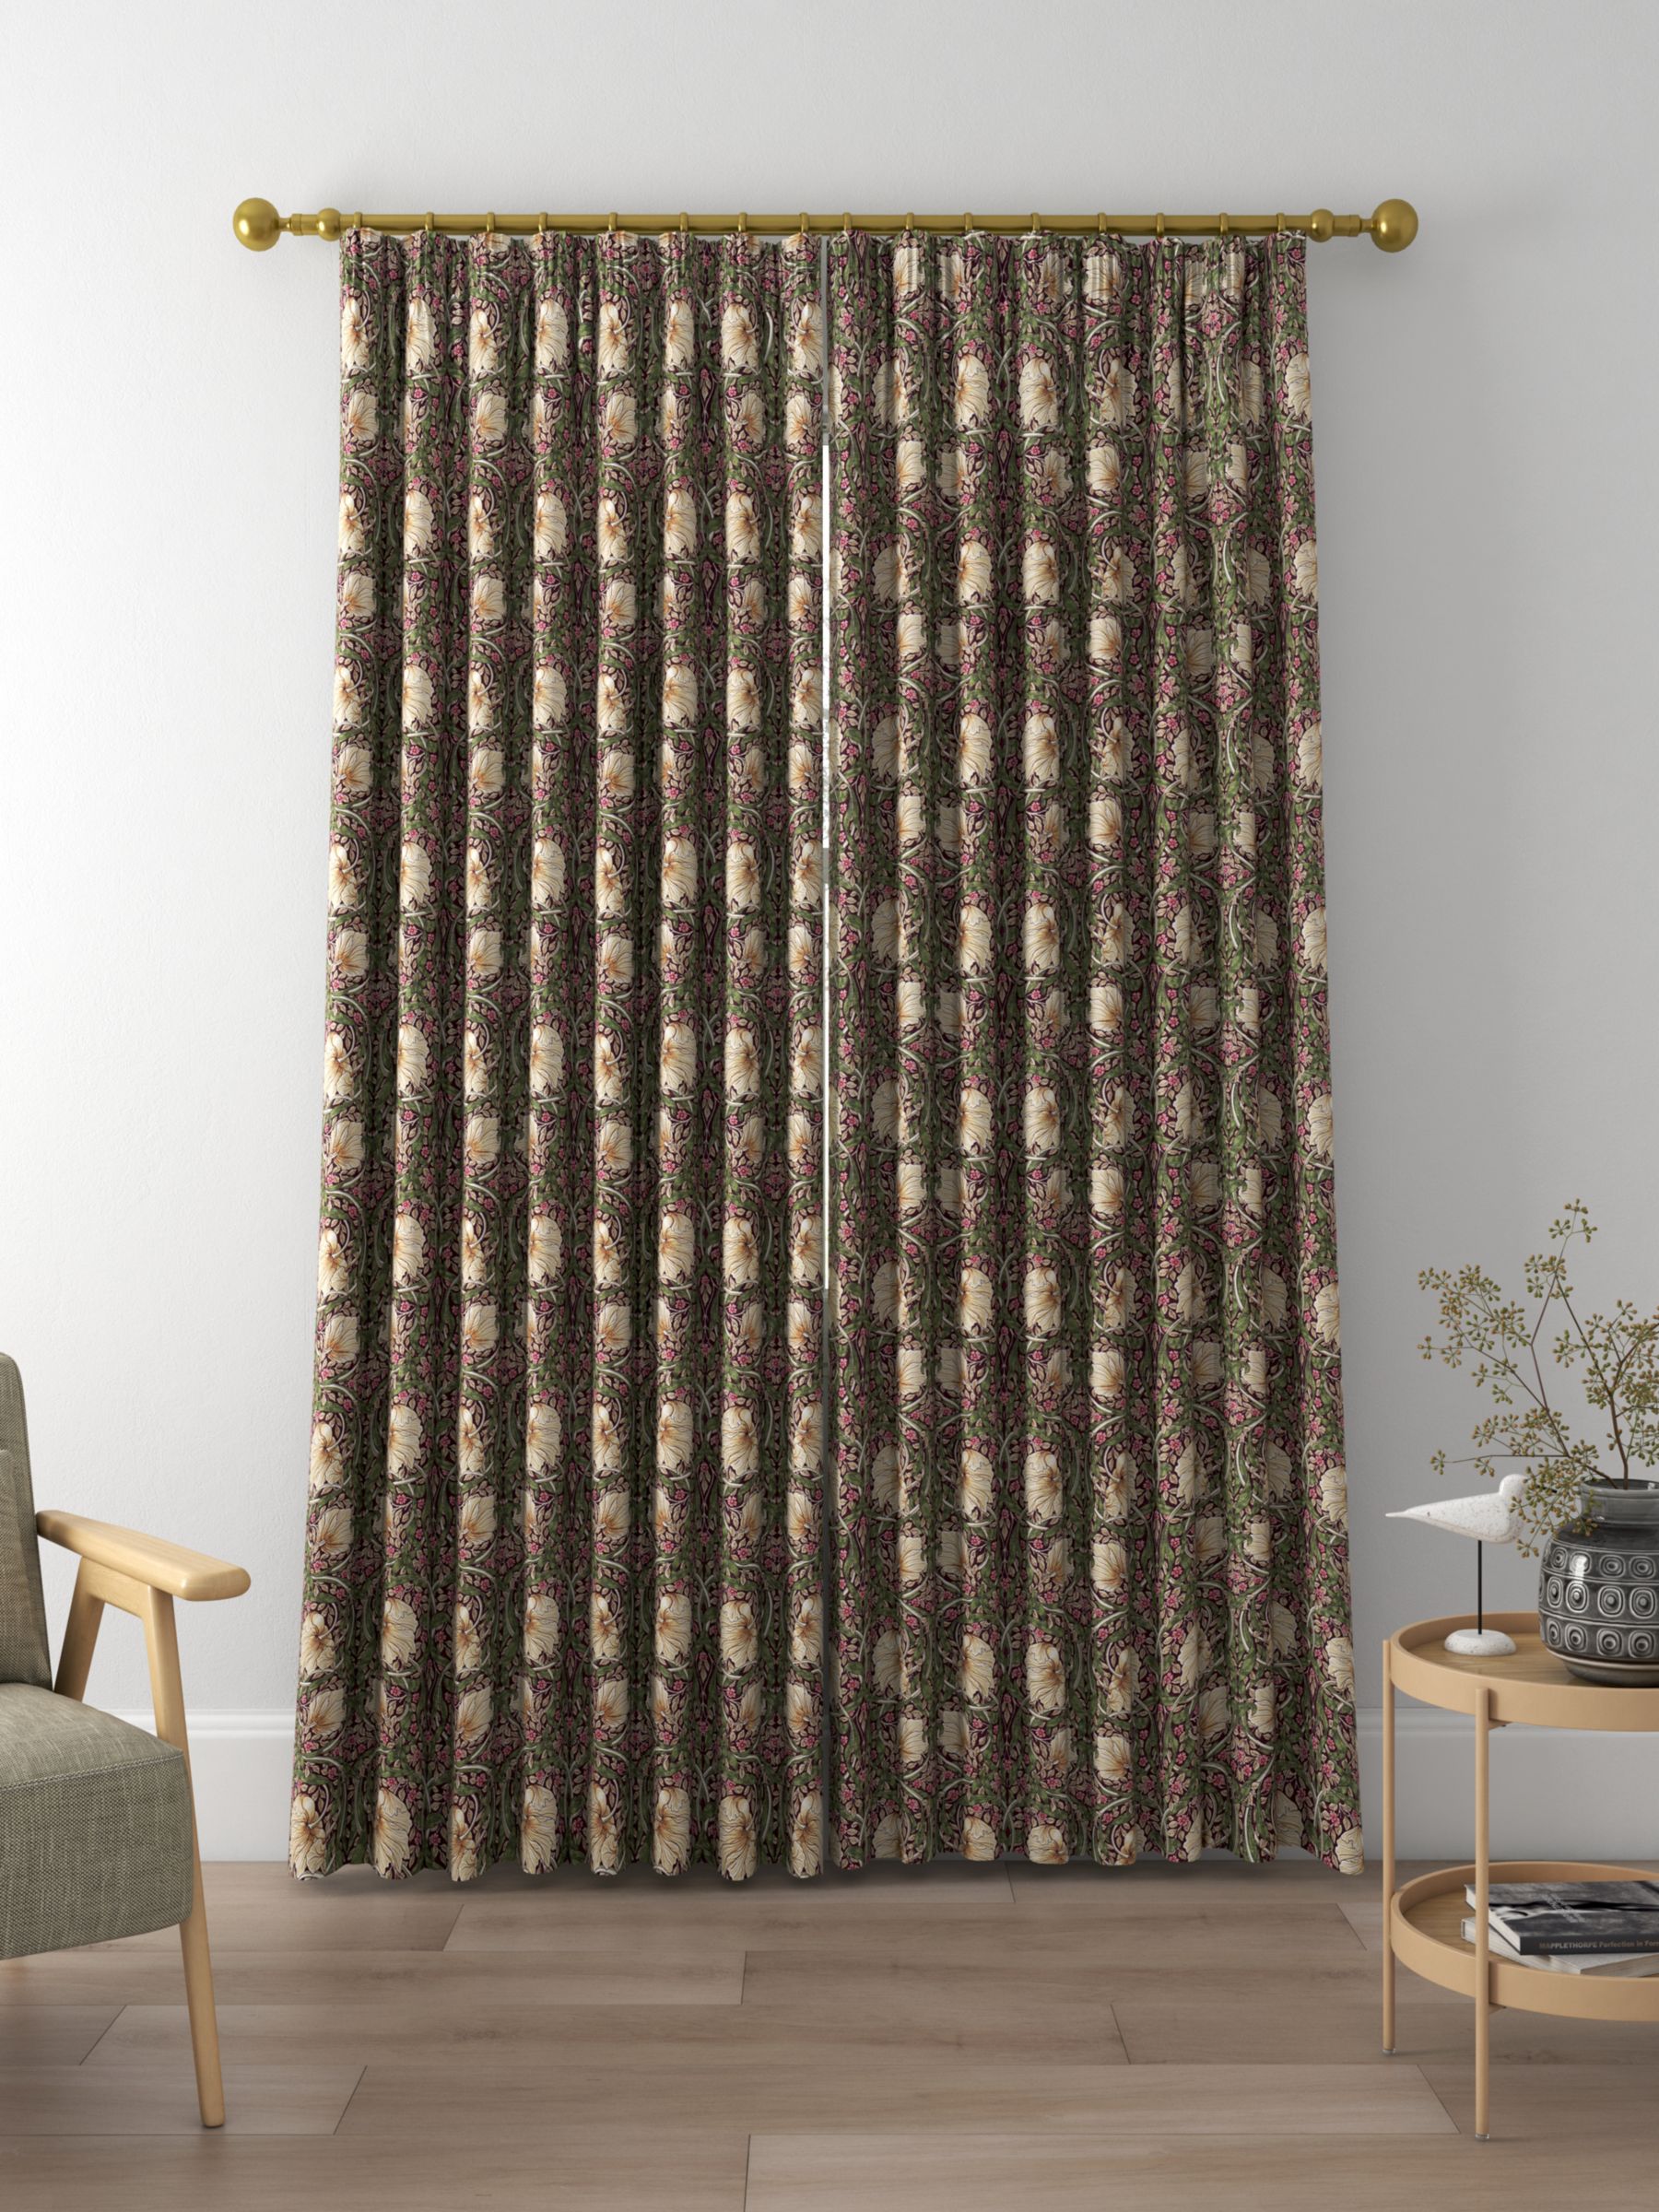 Morris & Co. Pimpernel Print Made to Measure Curtains, Aubergine/Olive